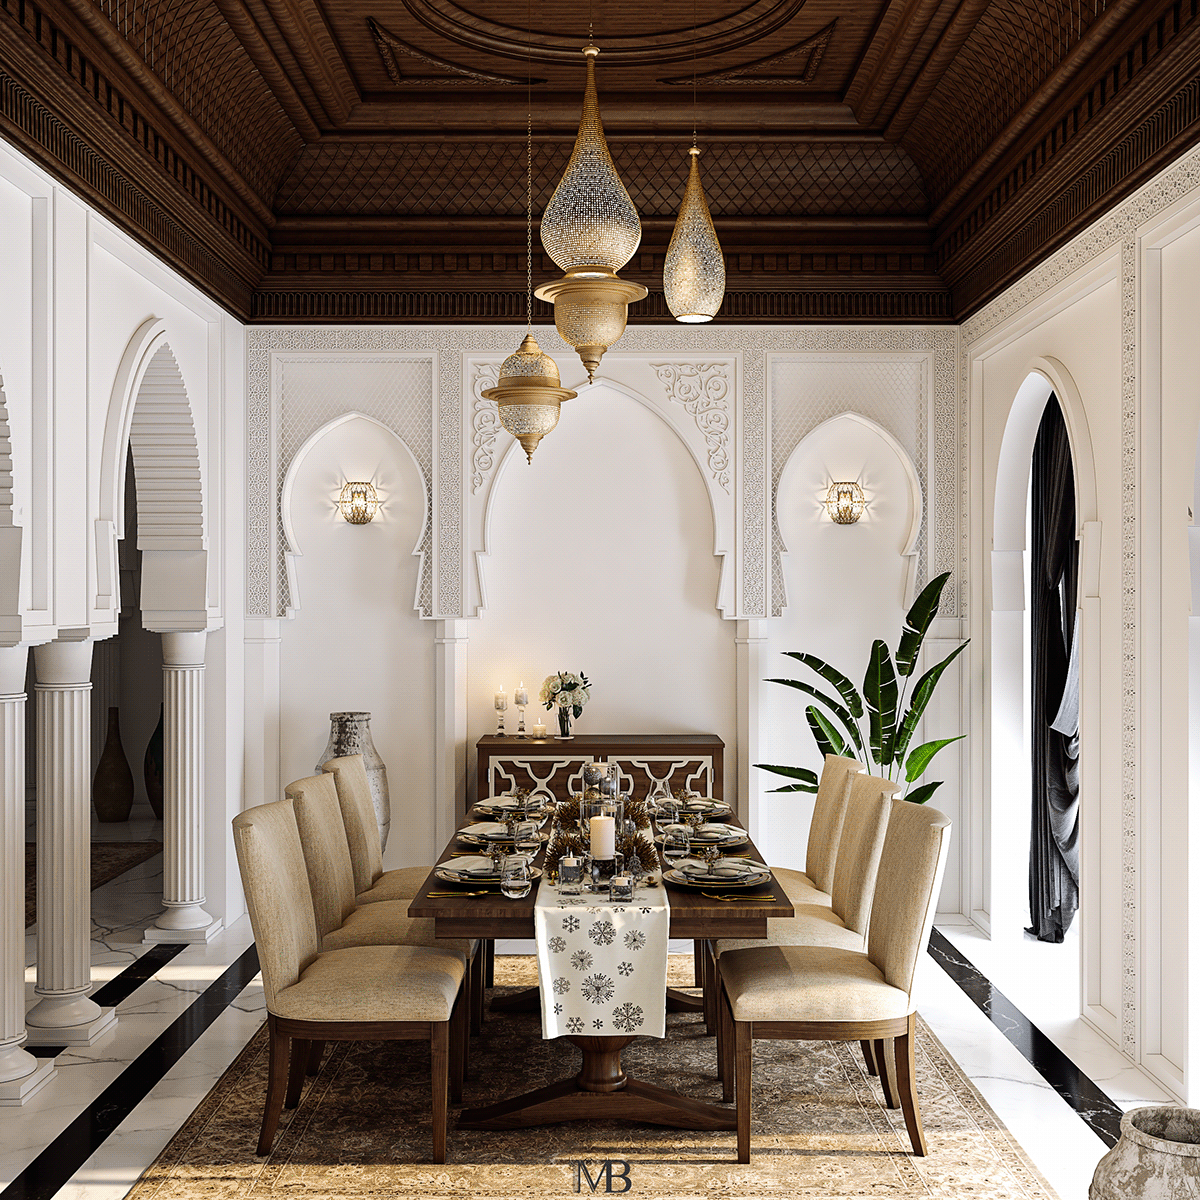 MOROCCAN - DINING ROOM on Behance